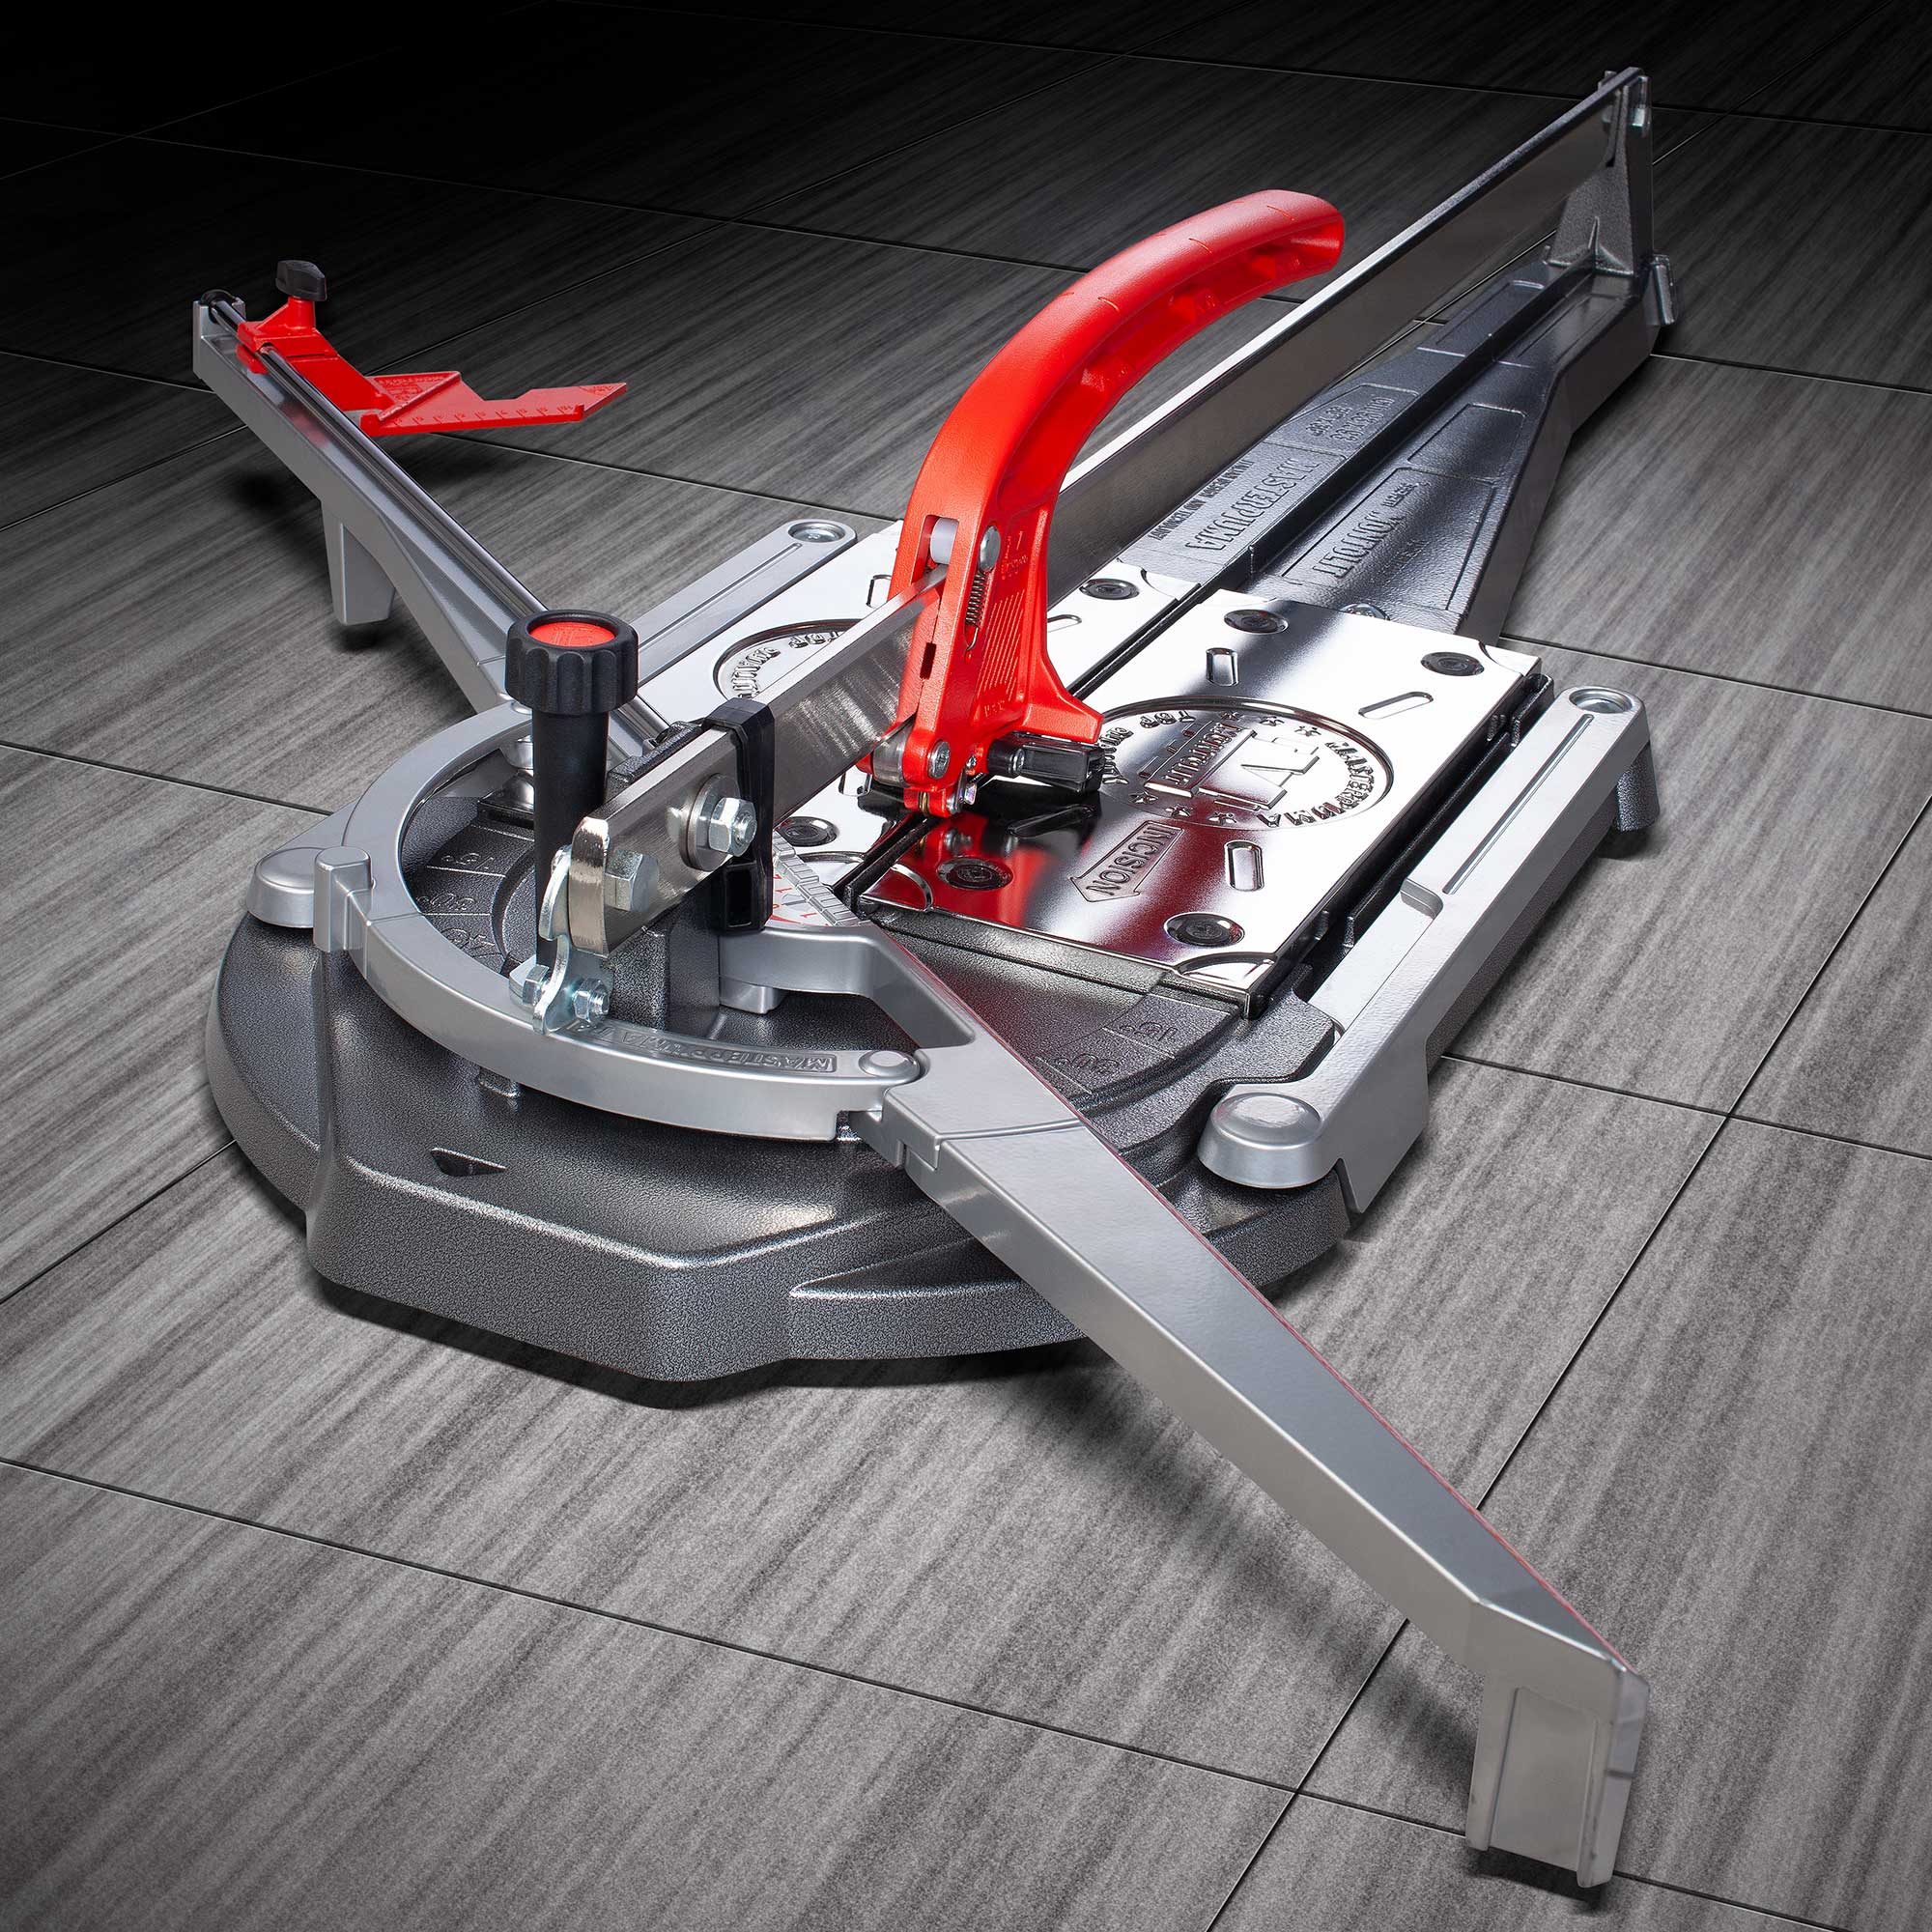 Tile Cutters for professional manual cutting | Montolit